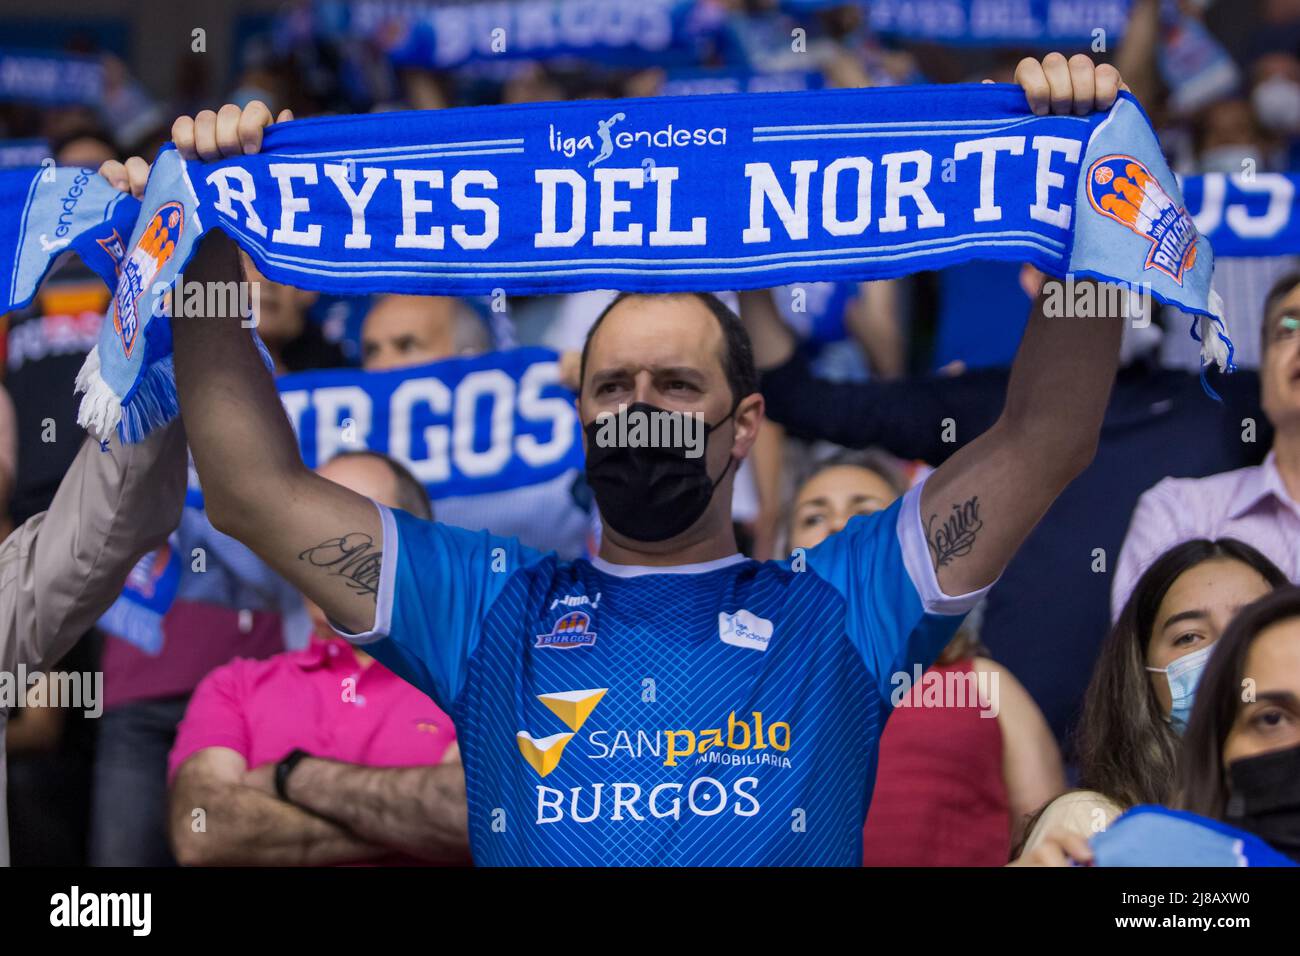 Burgos, Spain. 14th May, 2022. Hereda San Pablo Burgos supporters during Urbas Fuenlabrada victory over Hereda San Pablo Burgos 66 - 83 in Liga Endesa regular season game (day 34) celebrated in Burgos (Spain) at Coliseum Burgos. May 14th 2022. (Photo by Juan Carlos García Mate/Pacific Press) Credit: Pacific Press Media Production Corp./Alamy Live News Stock Photo